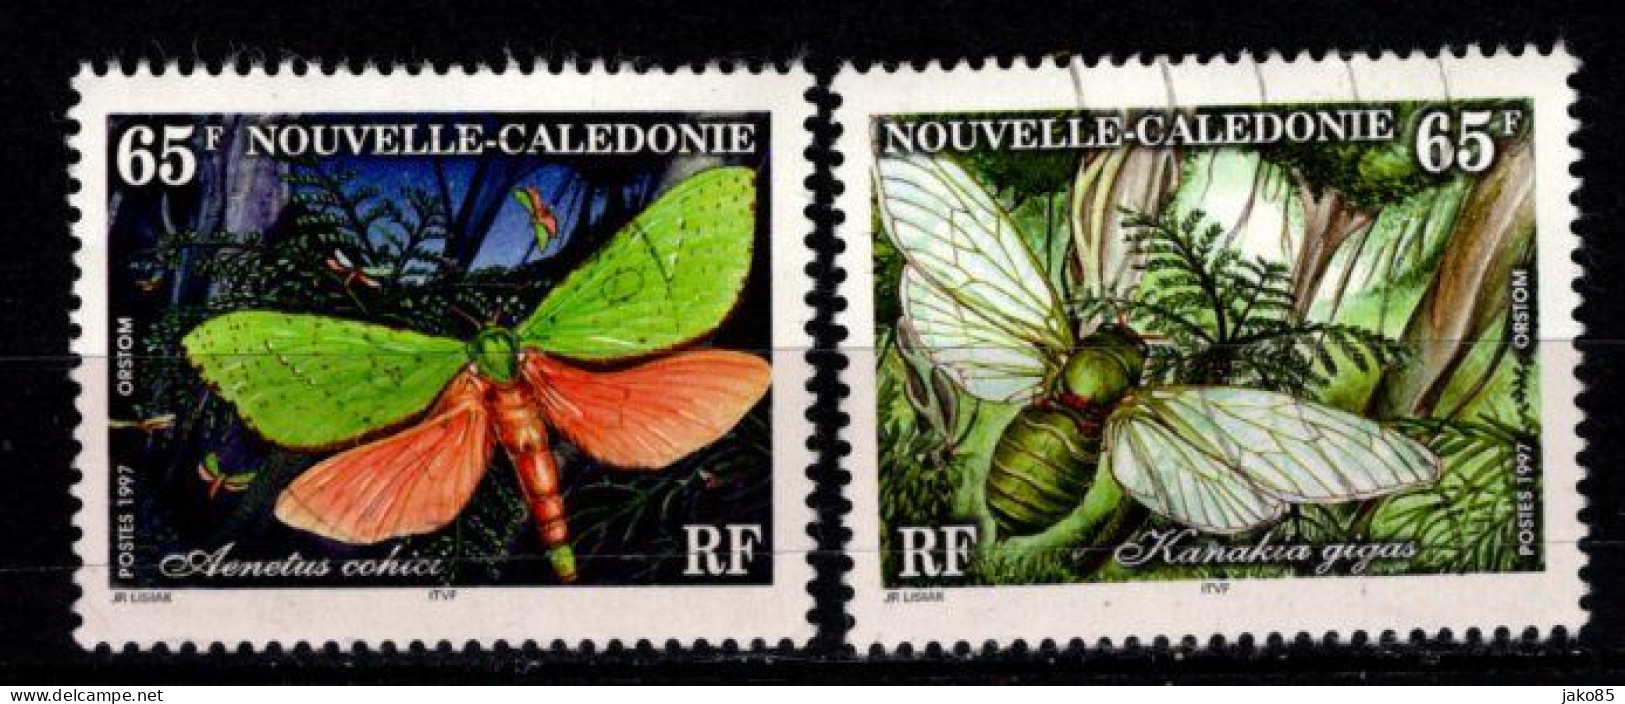 - Nelle Caledonie - 1997 - YT N° 731 + 733 -  Oblitérés -  Faune - Insectes - Used Stamps